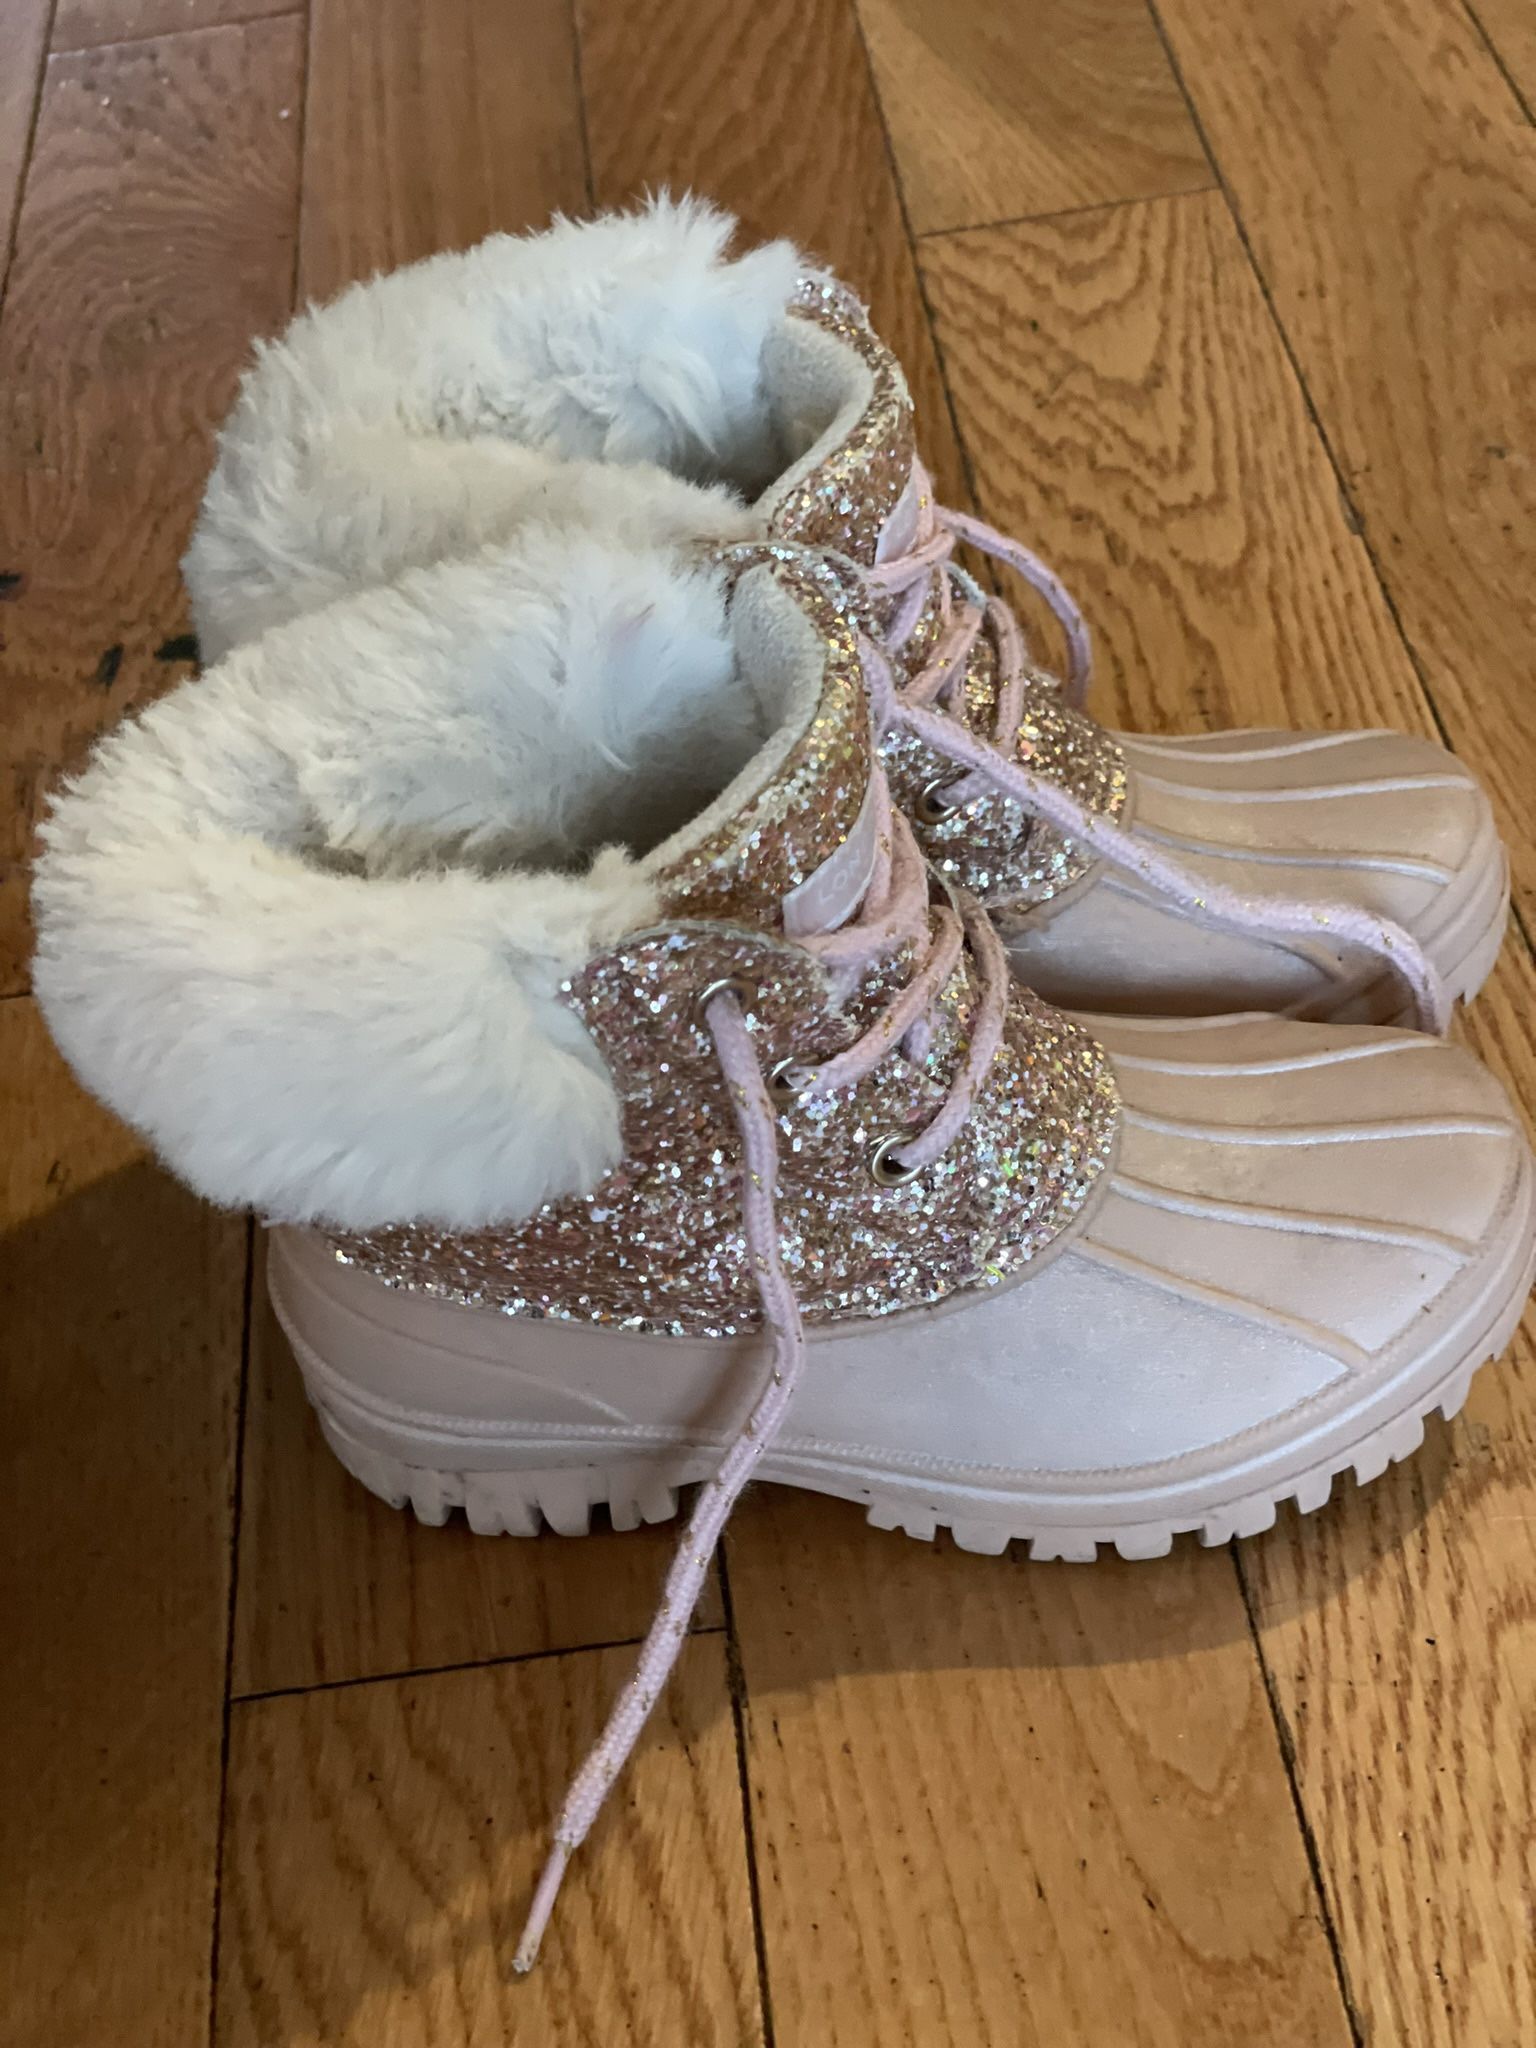 Pink Snow Boots 